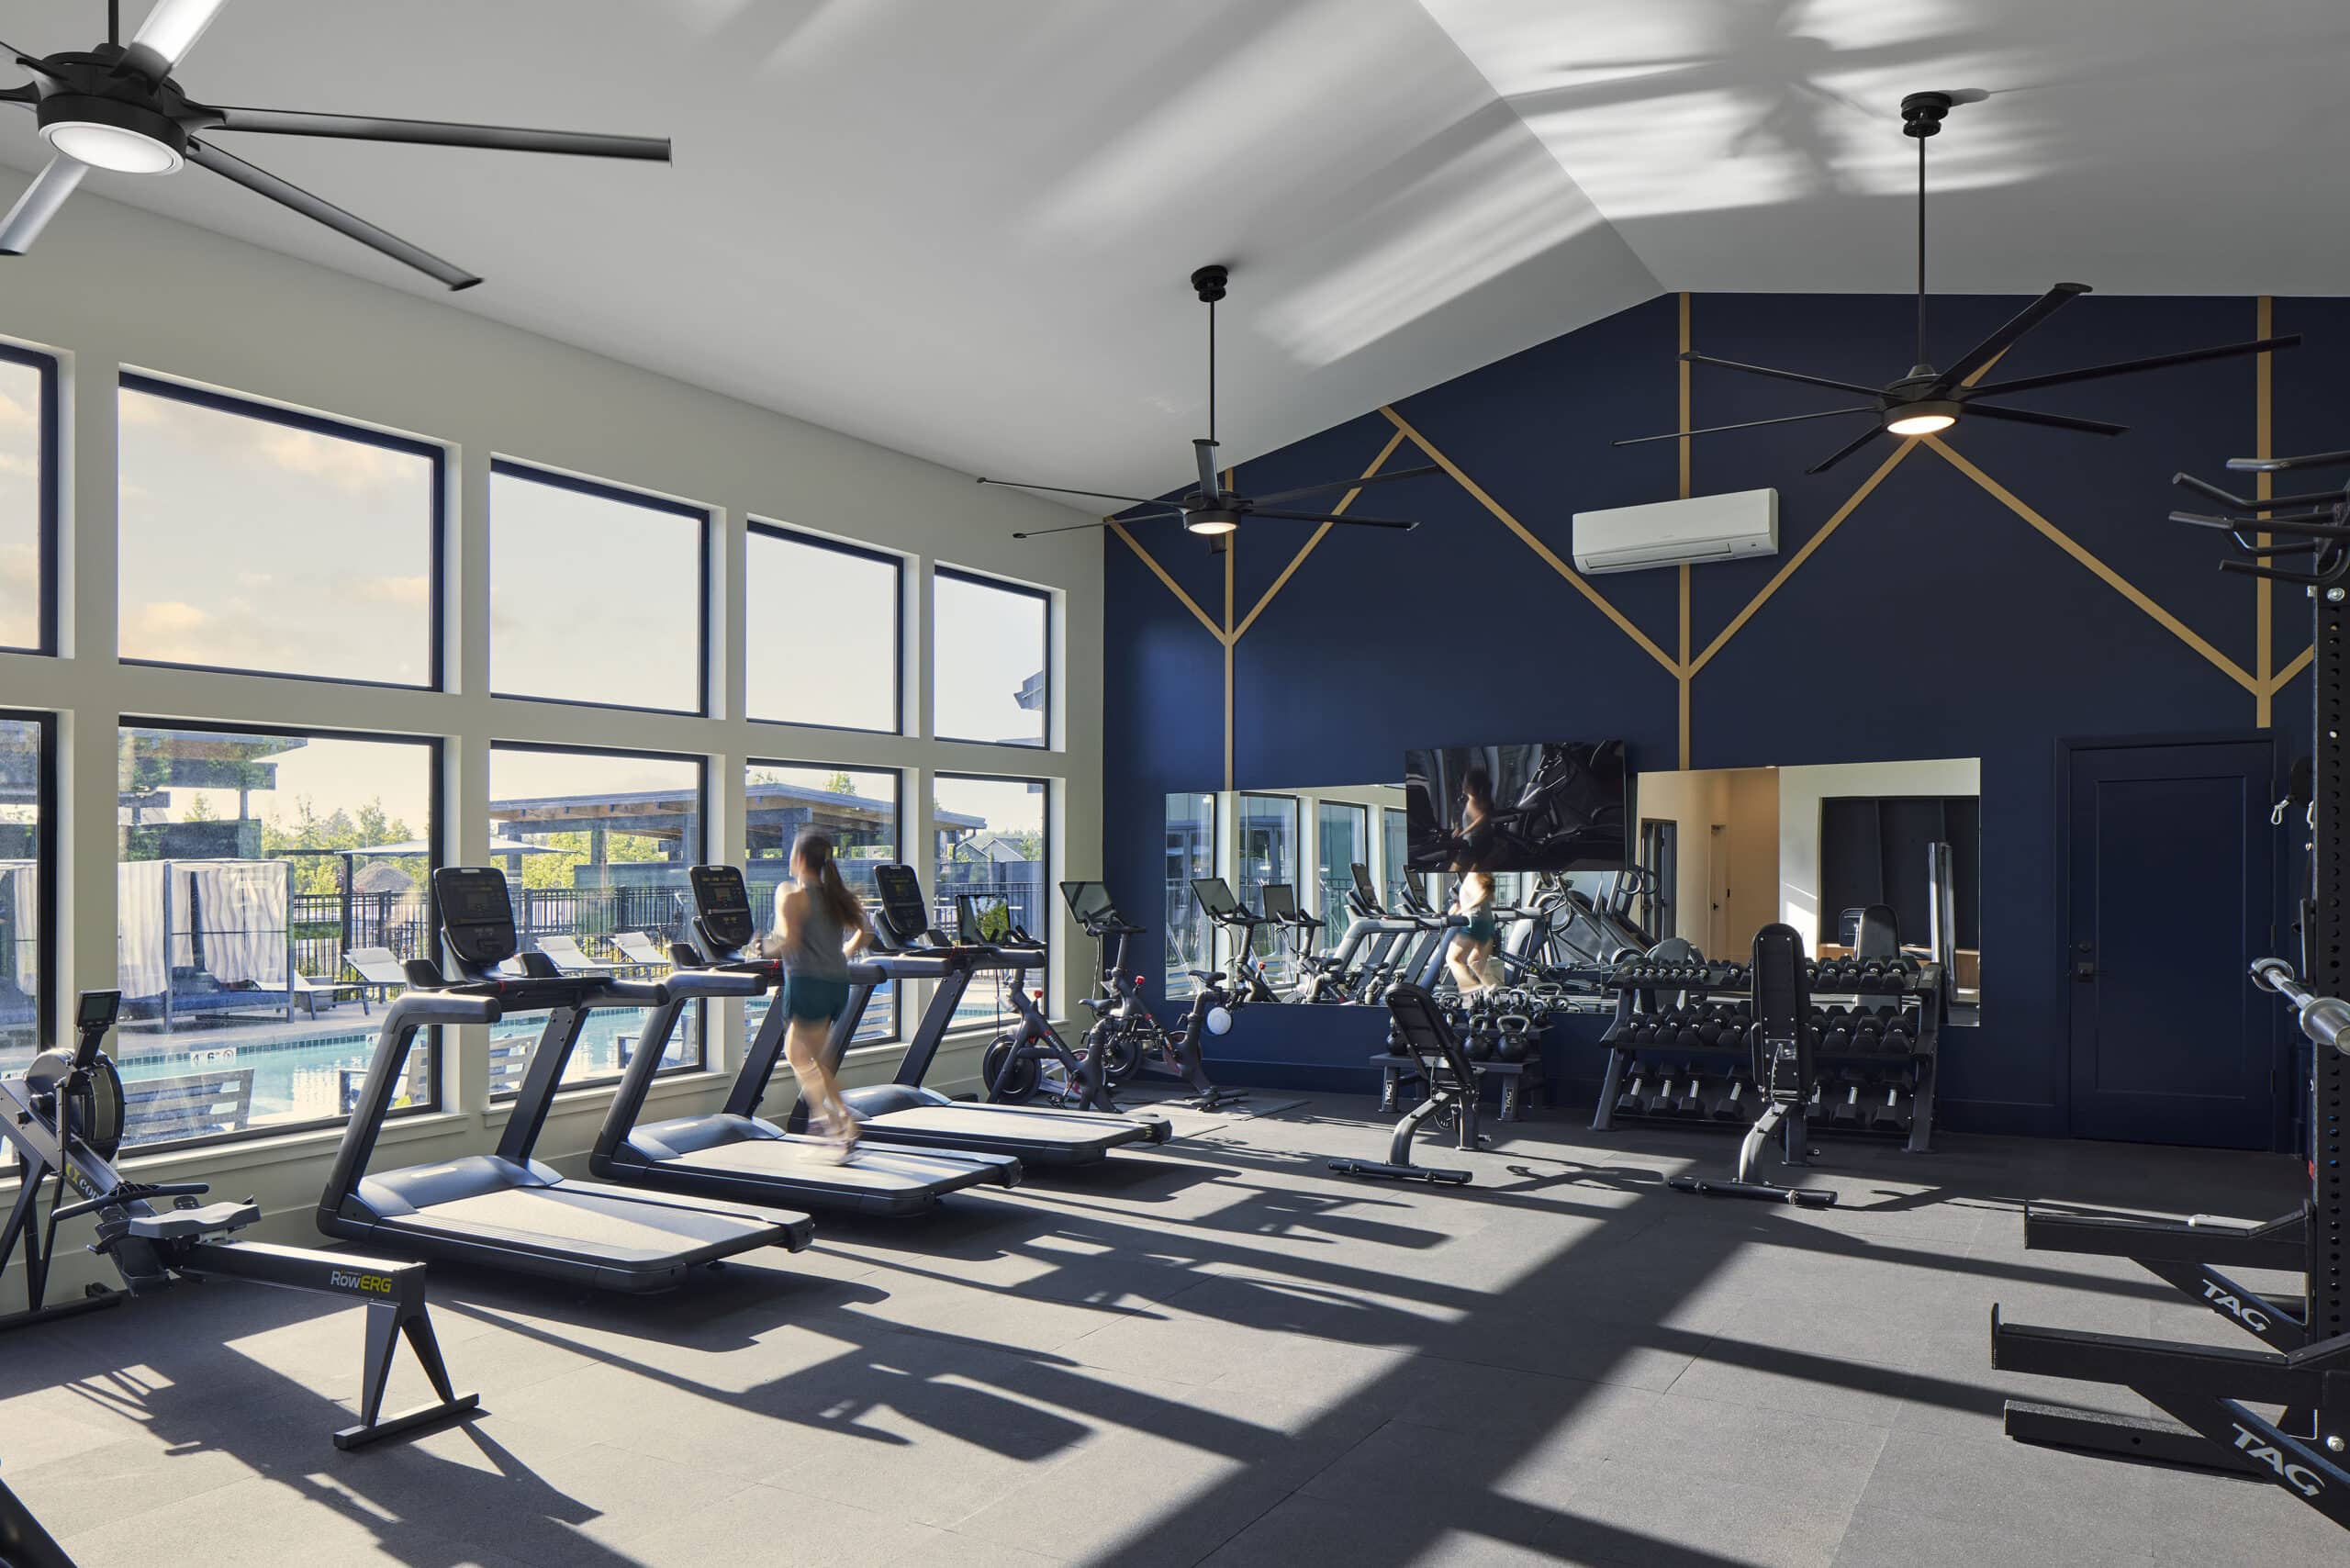 The Tilden apartments fitness center with ample cardio equipment